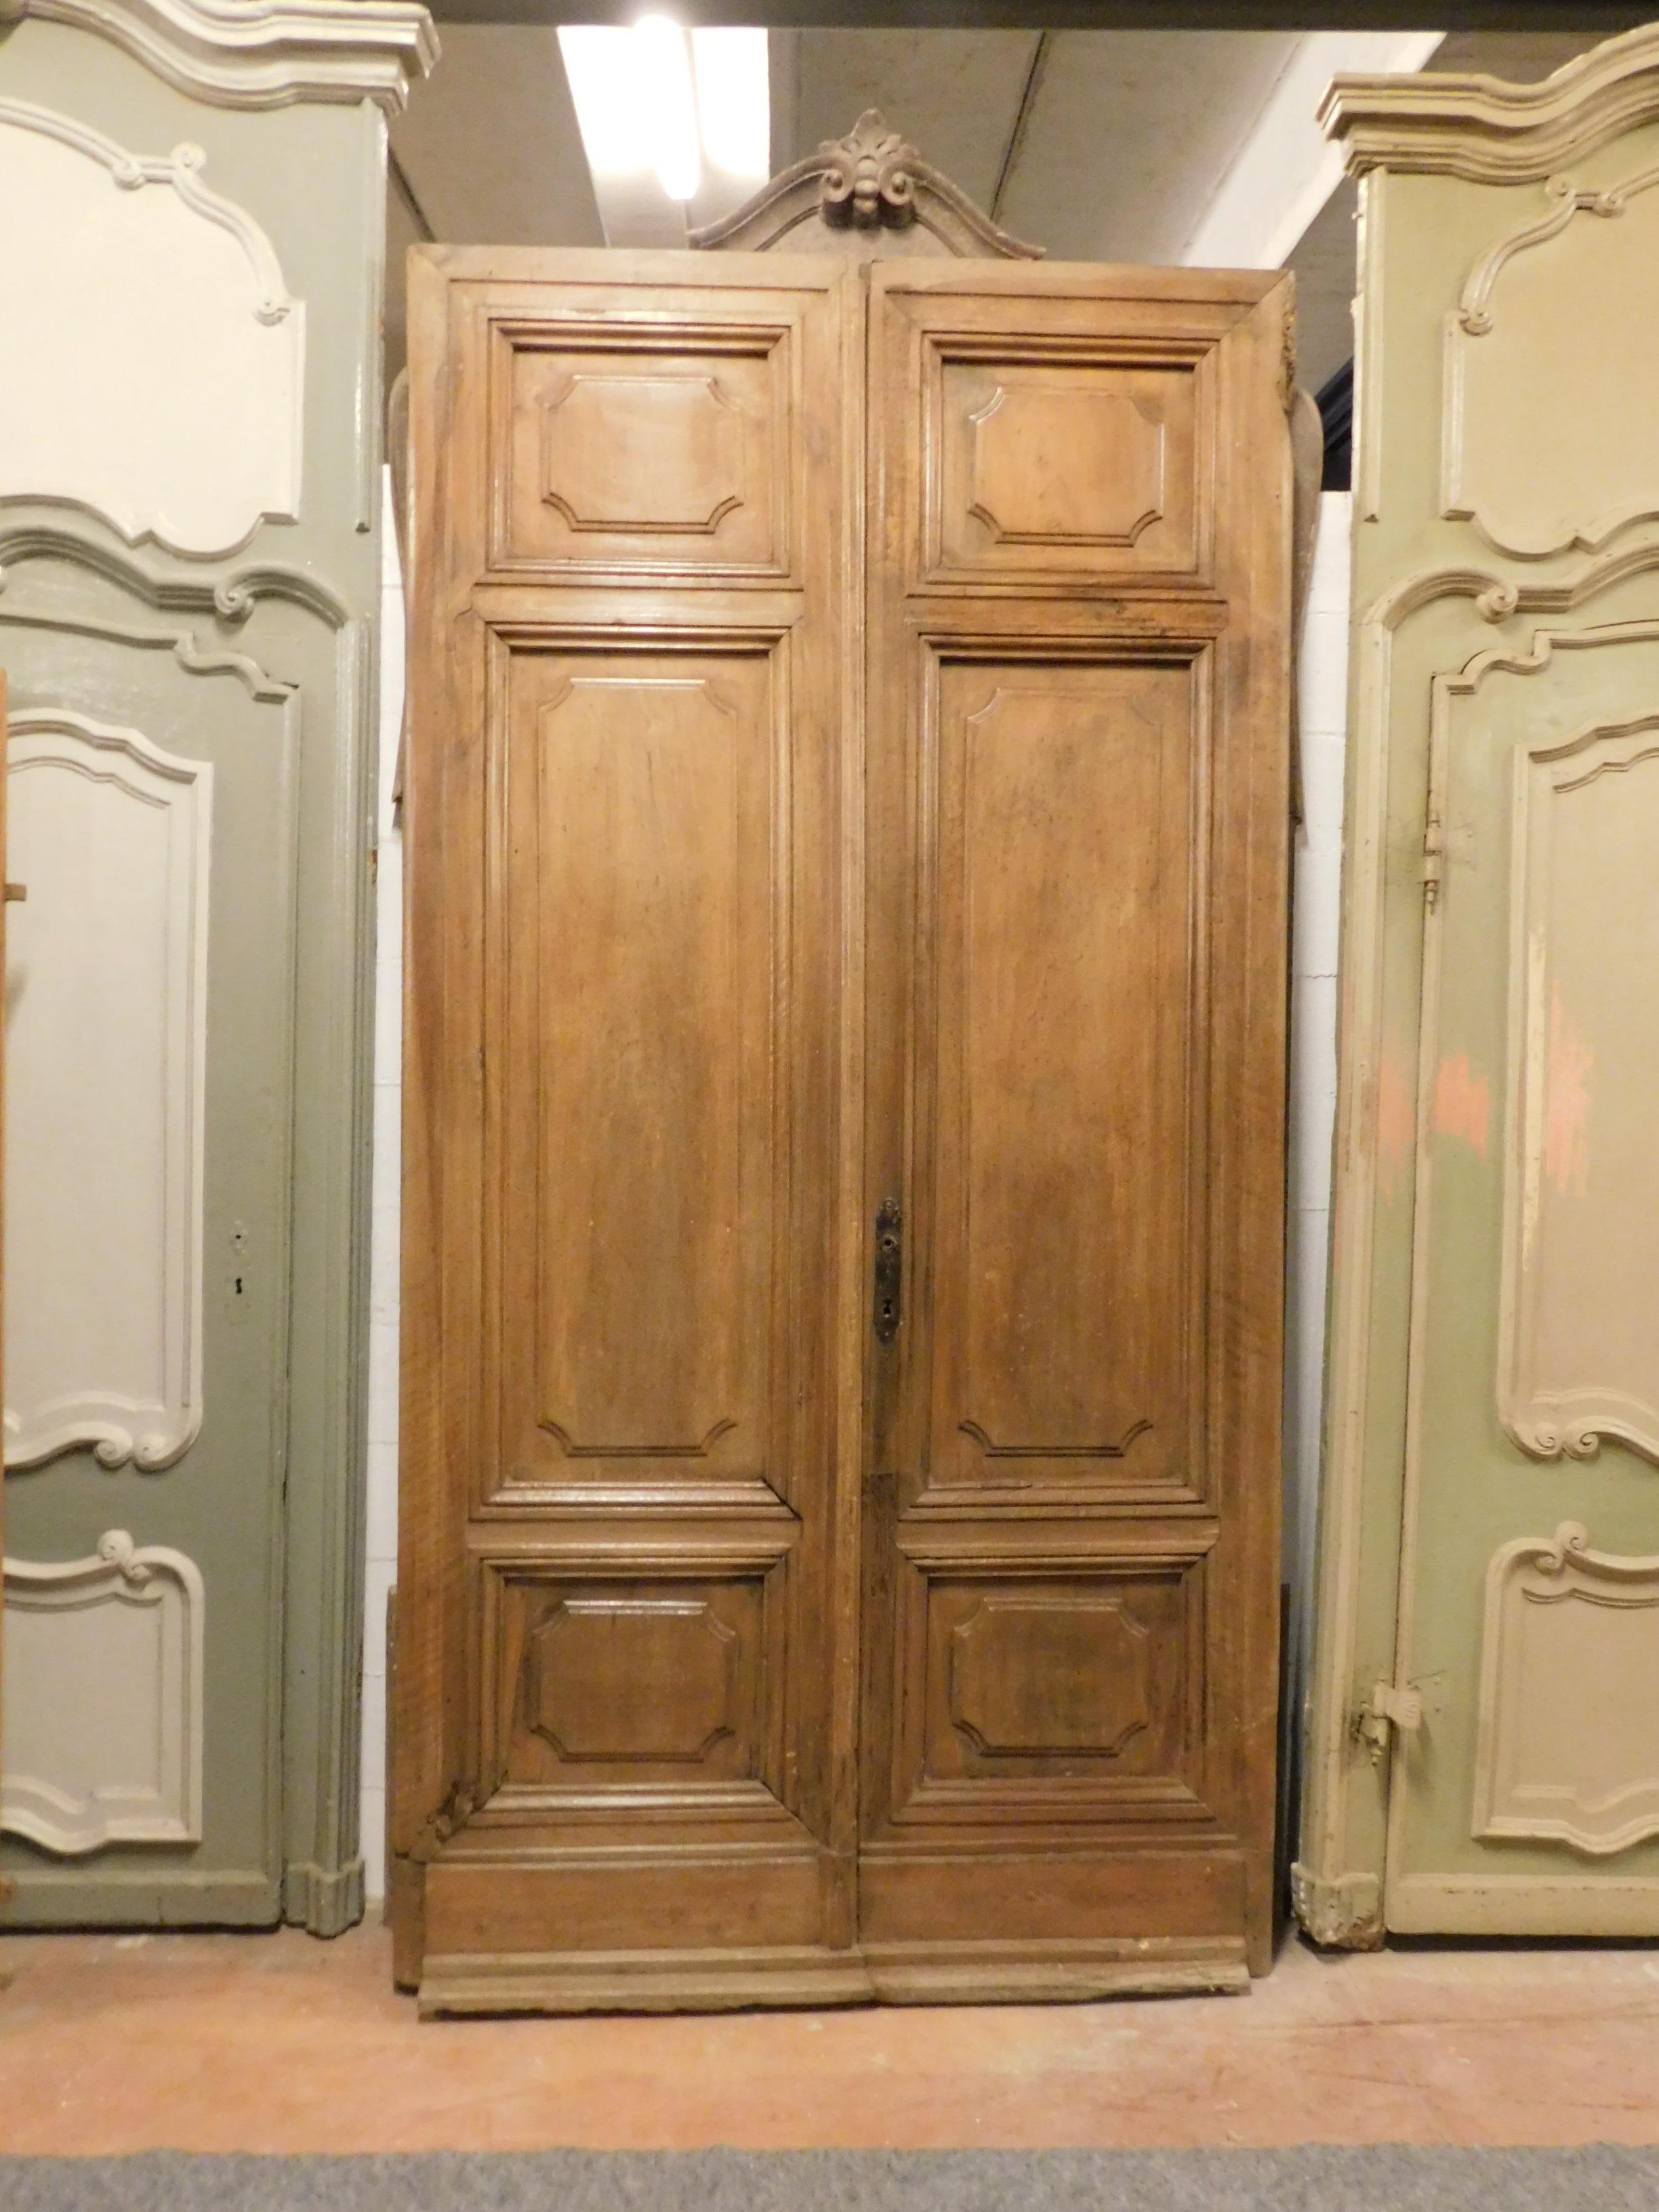 Antique double wing entrance door in honey light brown walnut, hand built in the early 1900s in Italy.
Very elegant and robust structure, in precious walnut, it is sold as it is now, without restoration, but it is in good condition.
It will give a